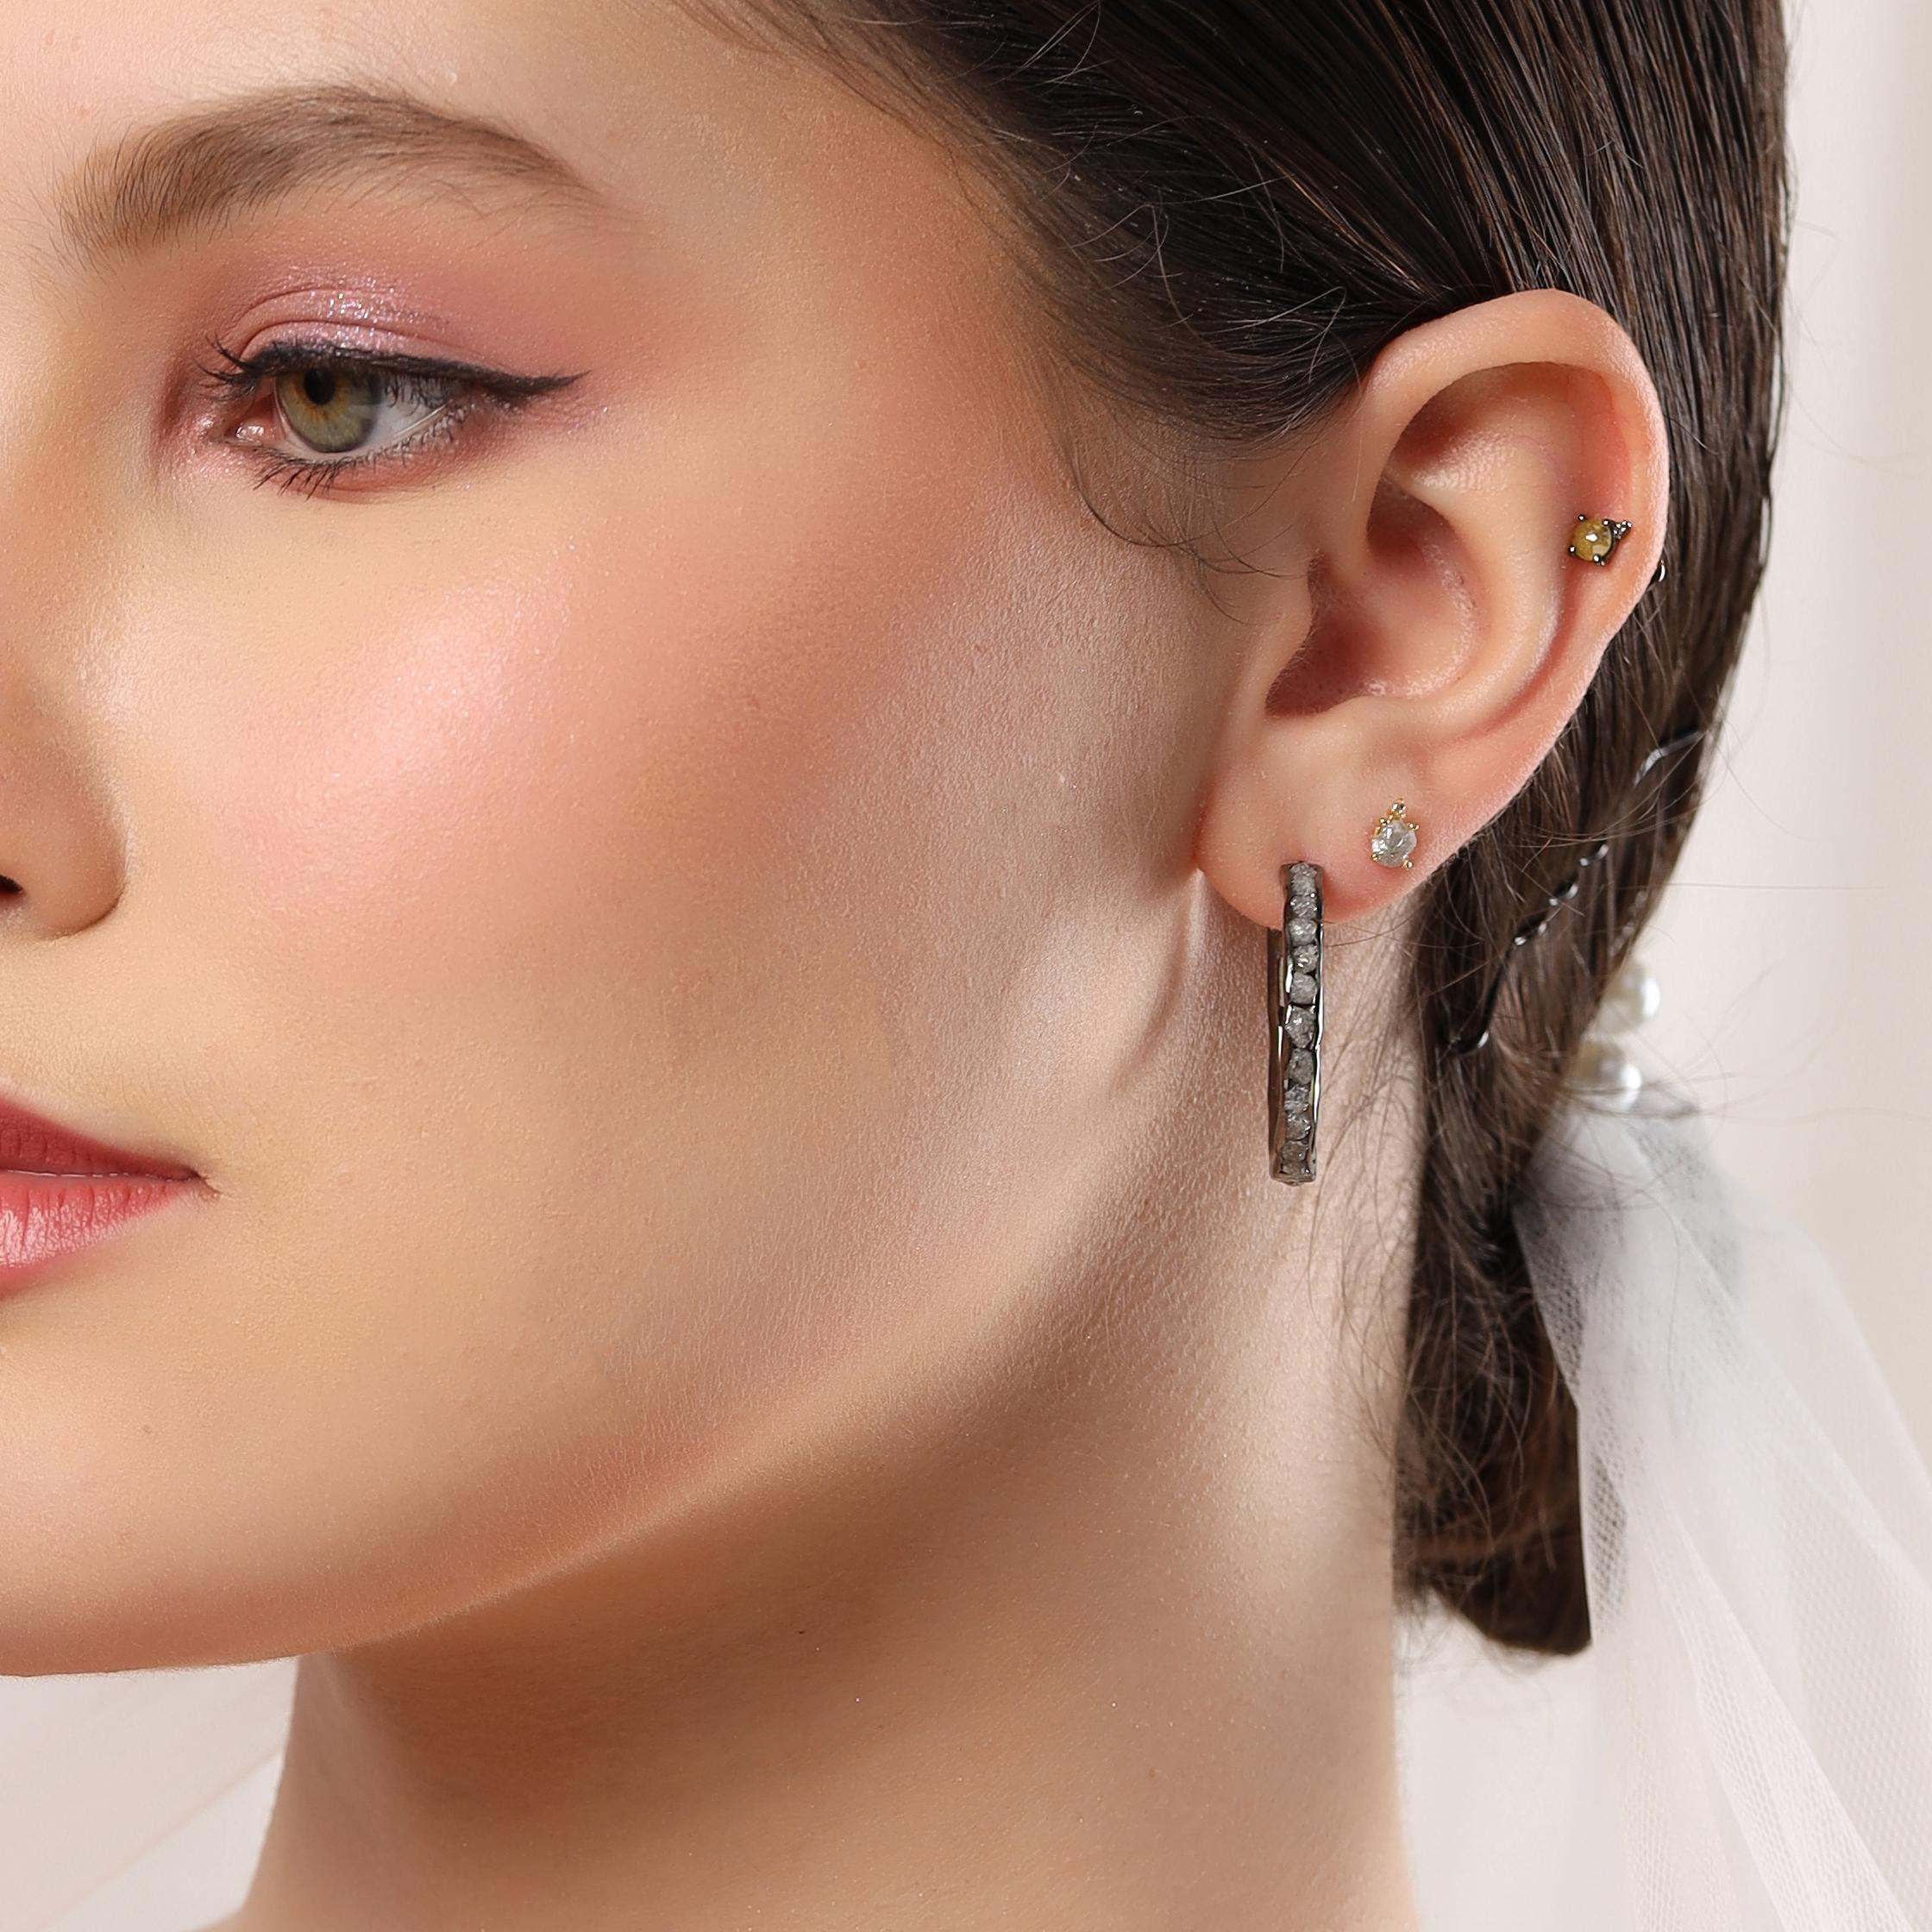 Modern A.deitiy wedding earrings made with recycled sterling silver and mined diamonds